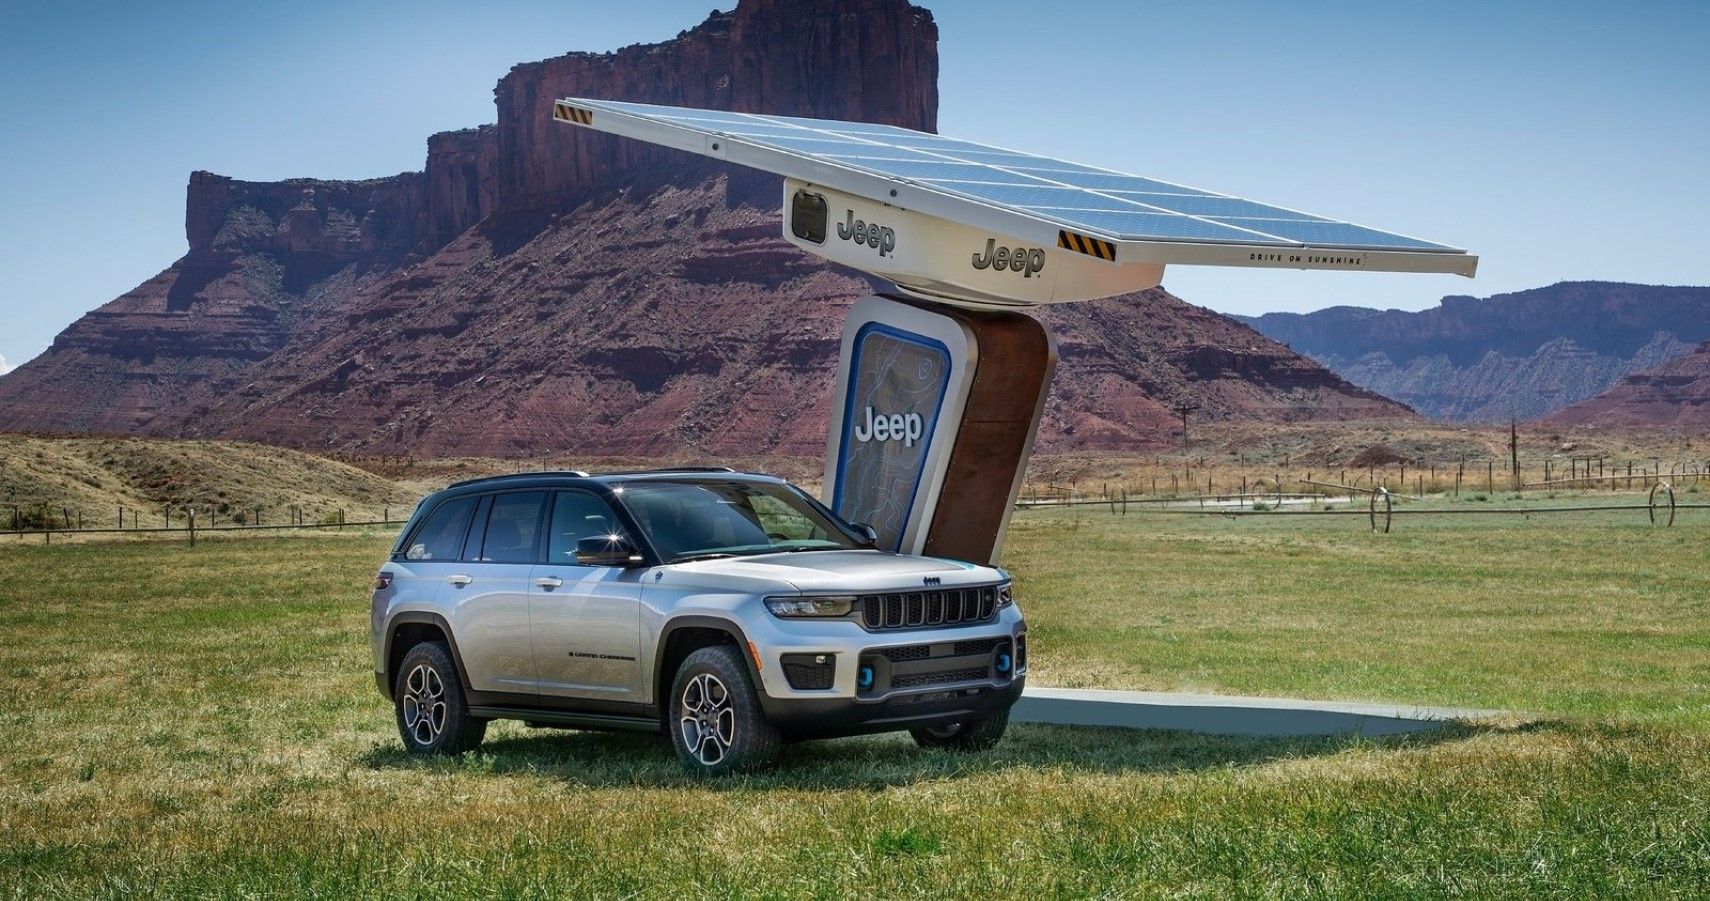 2022 Jeep Grand Cherokee 4xe imagined with a charging station out in the wild